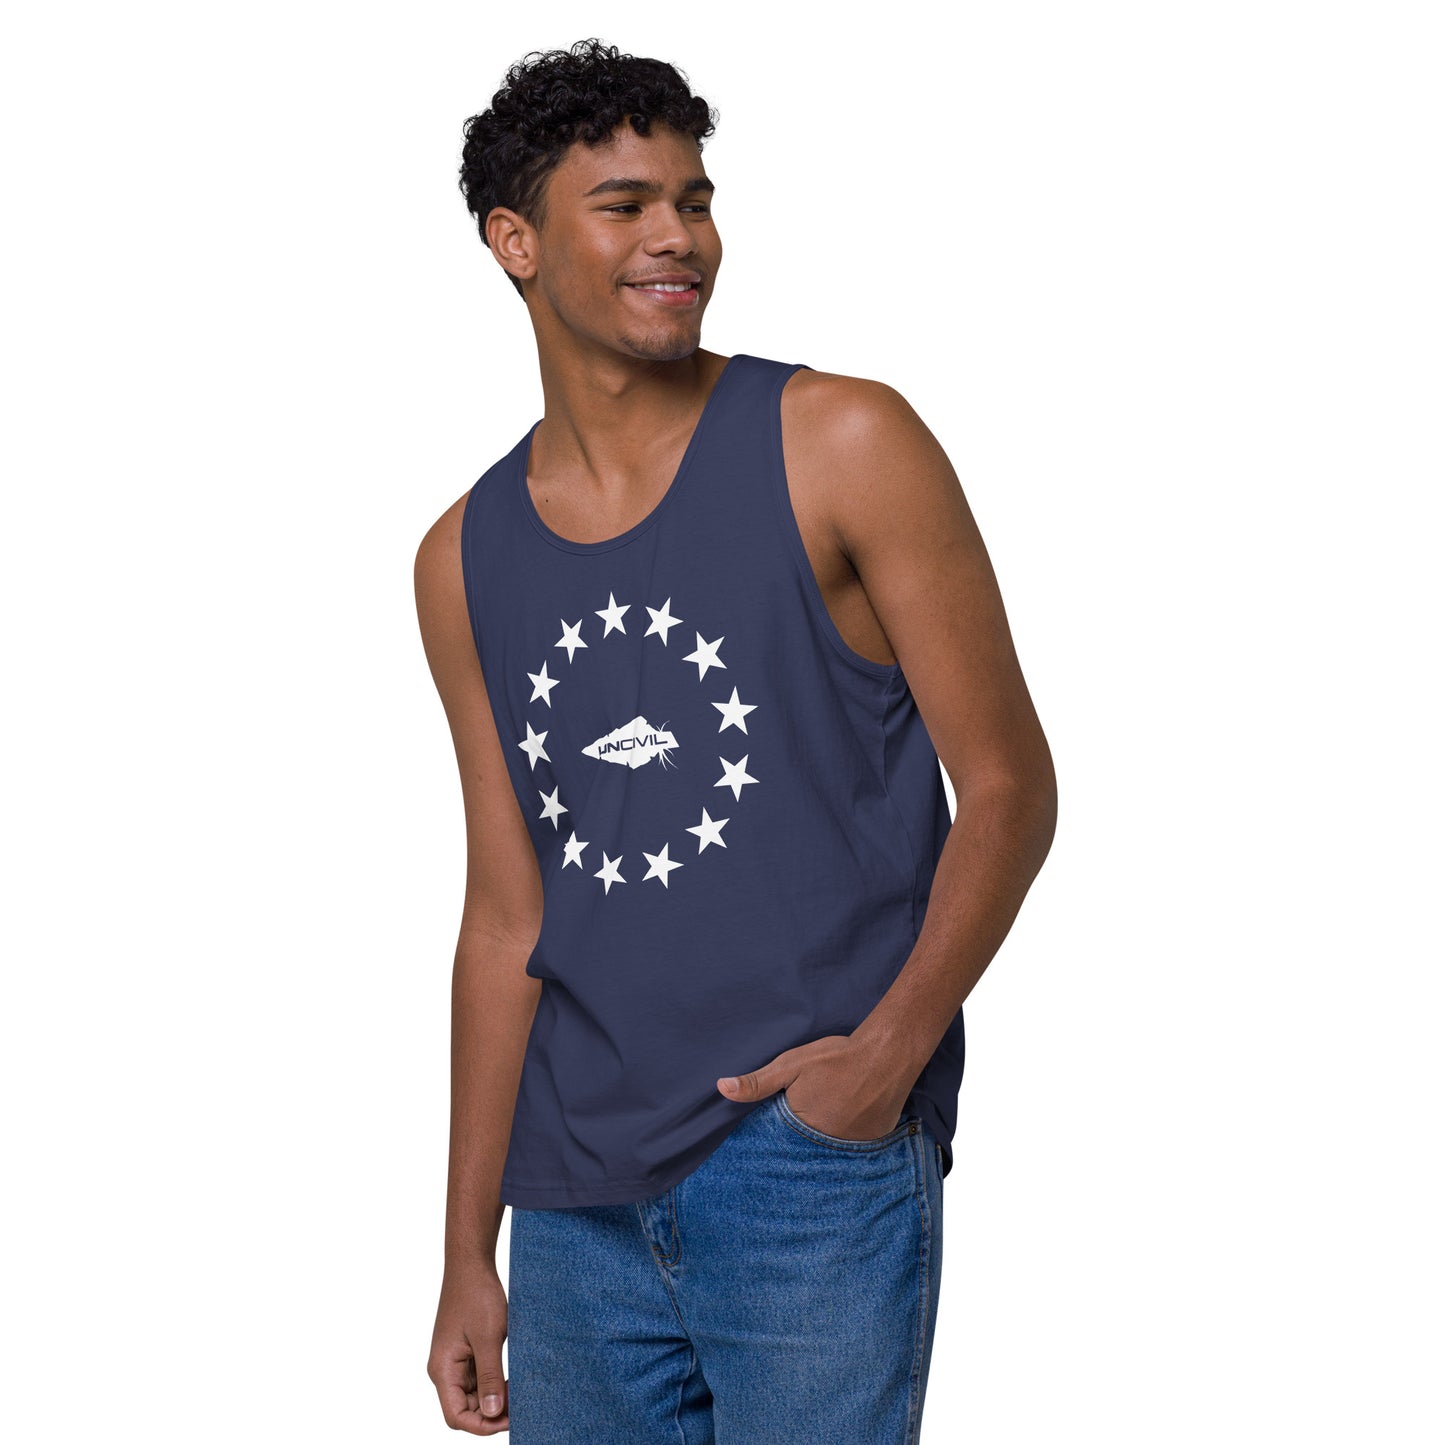 Betsy Ross men's tank top. Featuring the iconic 13 stars design, this tank is perfect for anyone who loves America and its rich history. Blue and white.